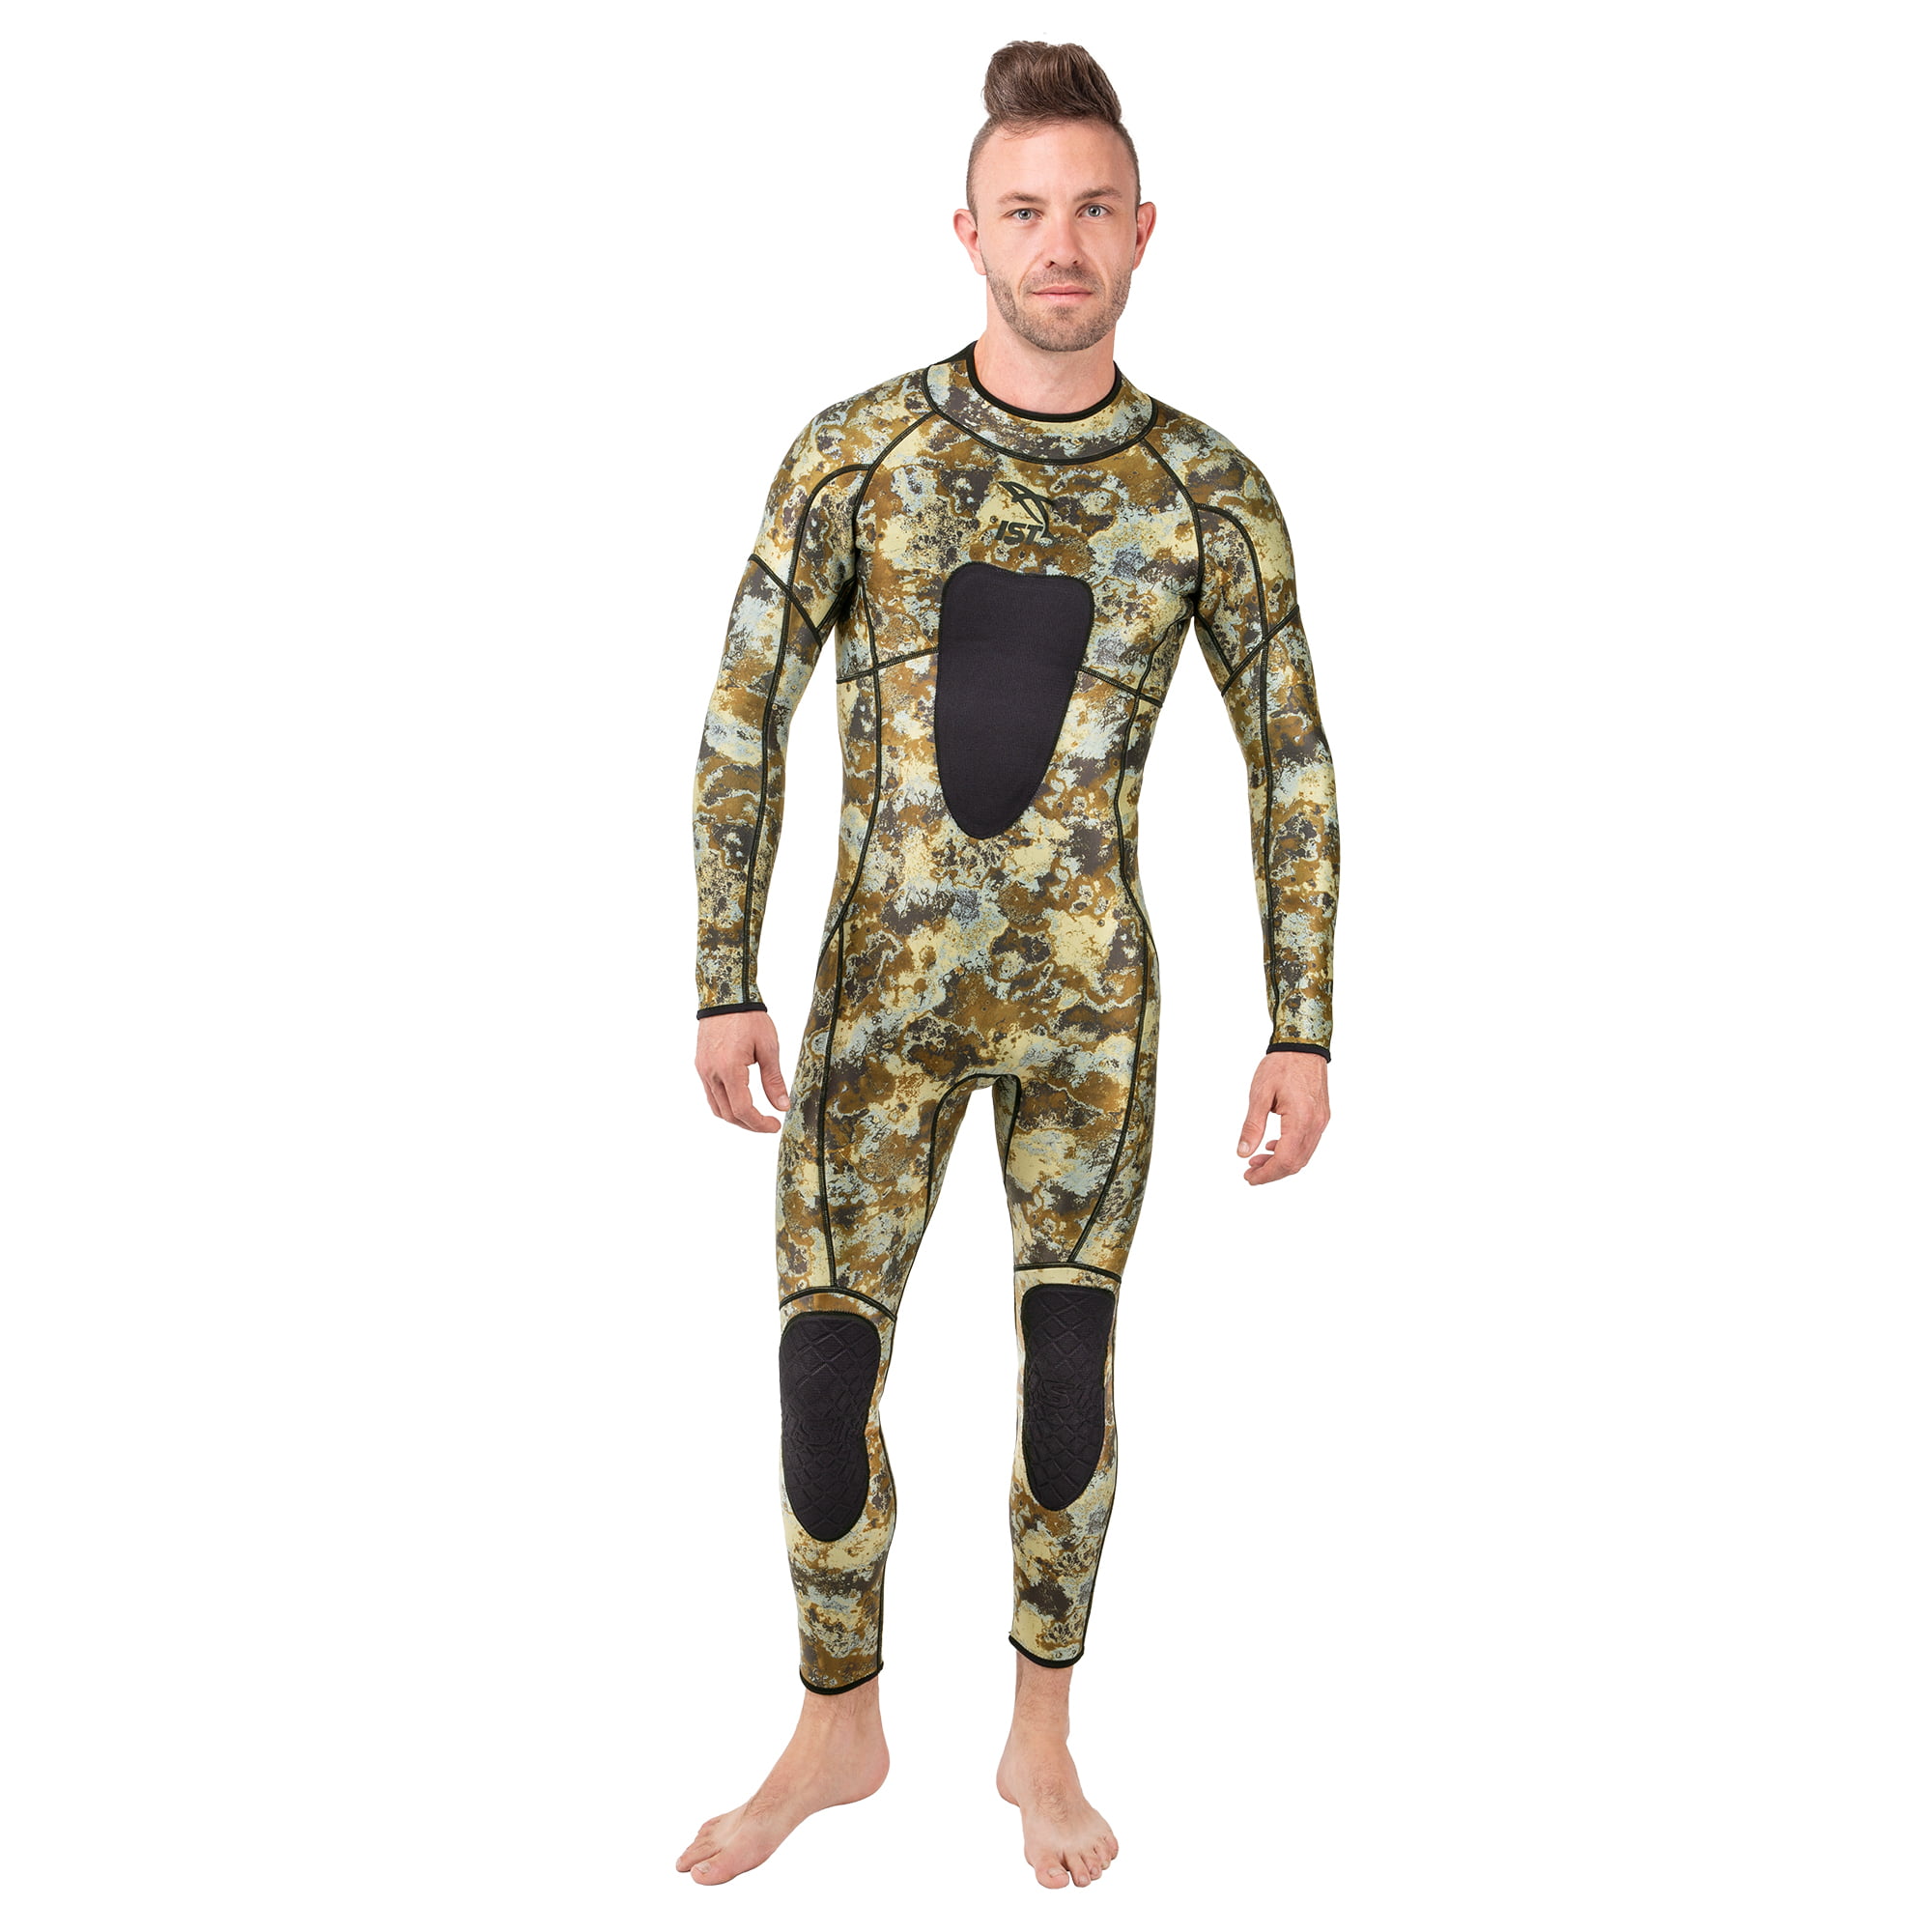 IST Wetsuit w/ Gun Pad Small 3mm GREEN Camo Scuba Diving Freediving Spearfishing 